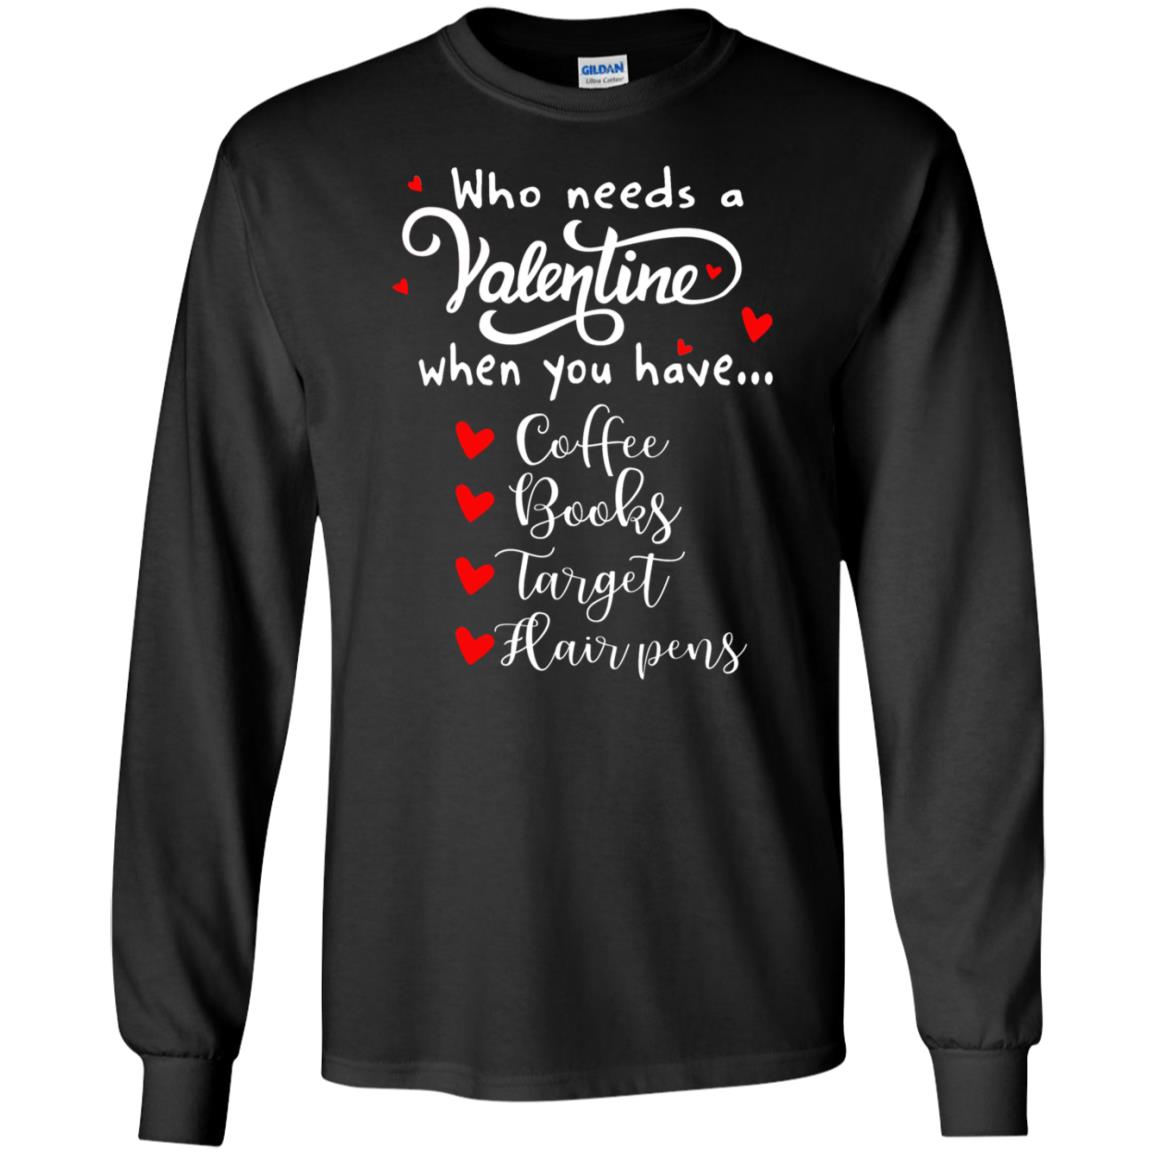 Who Needs A Valentine When You Have Coffee Books Target Hair PensG240 Gildan LS Ultra Cotton T-Shirt